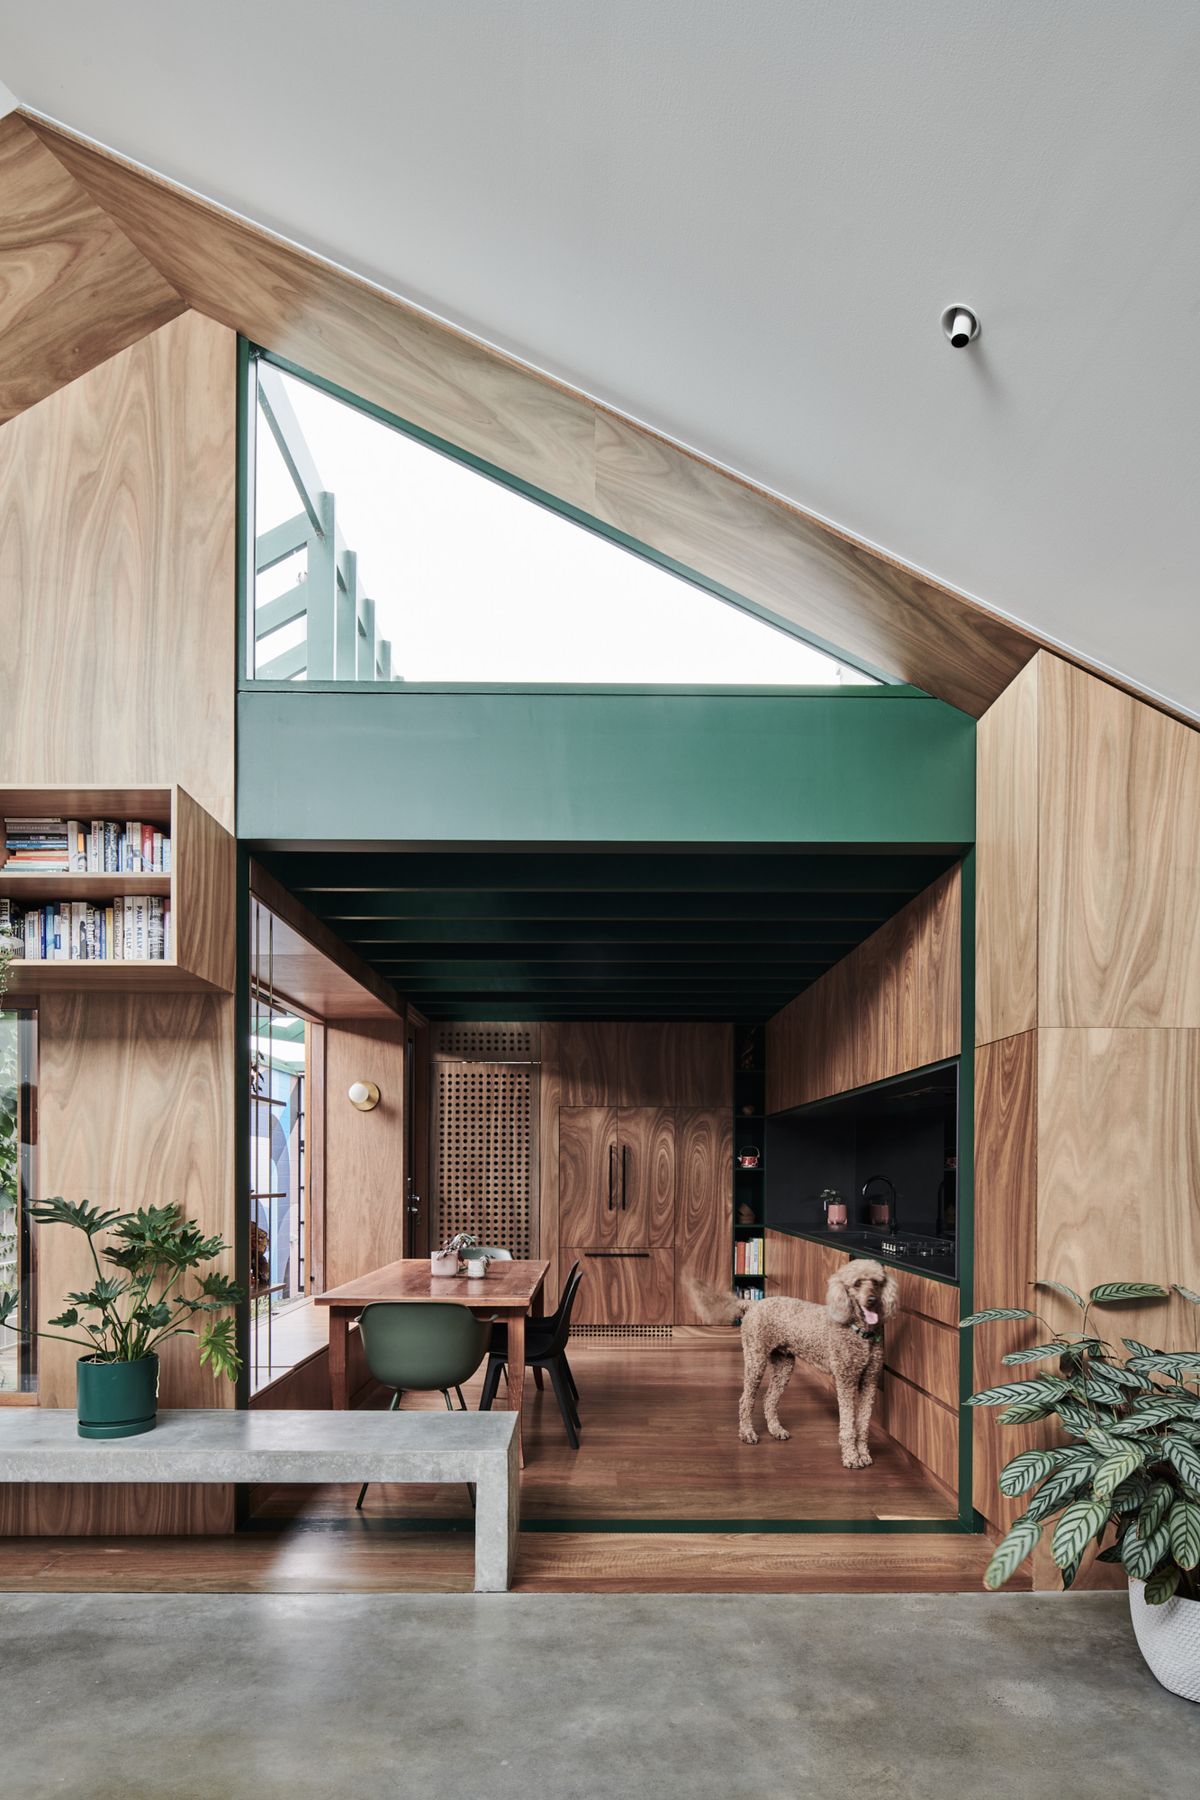 Hot Top Peak by FIGR Architecture showing timber veneer kitchen with a poodle